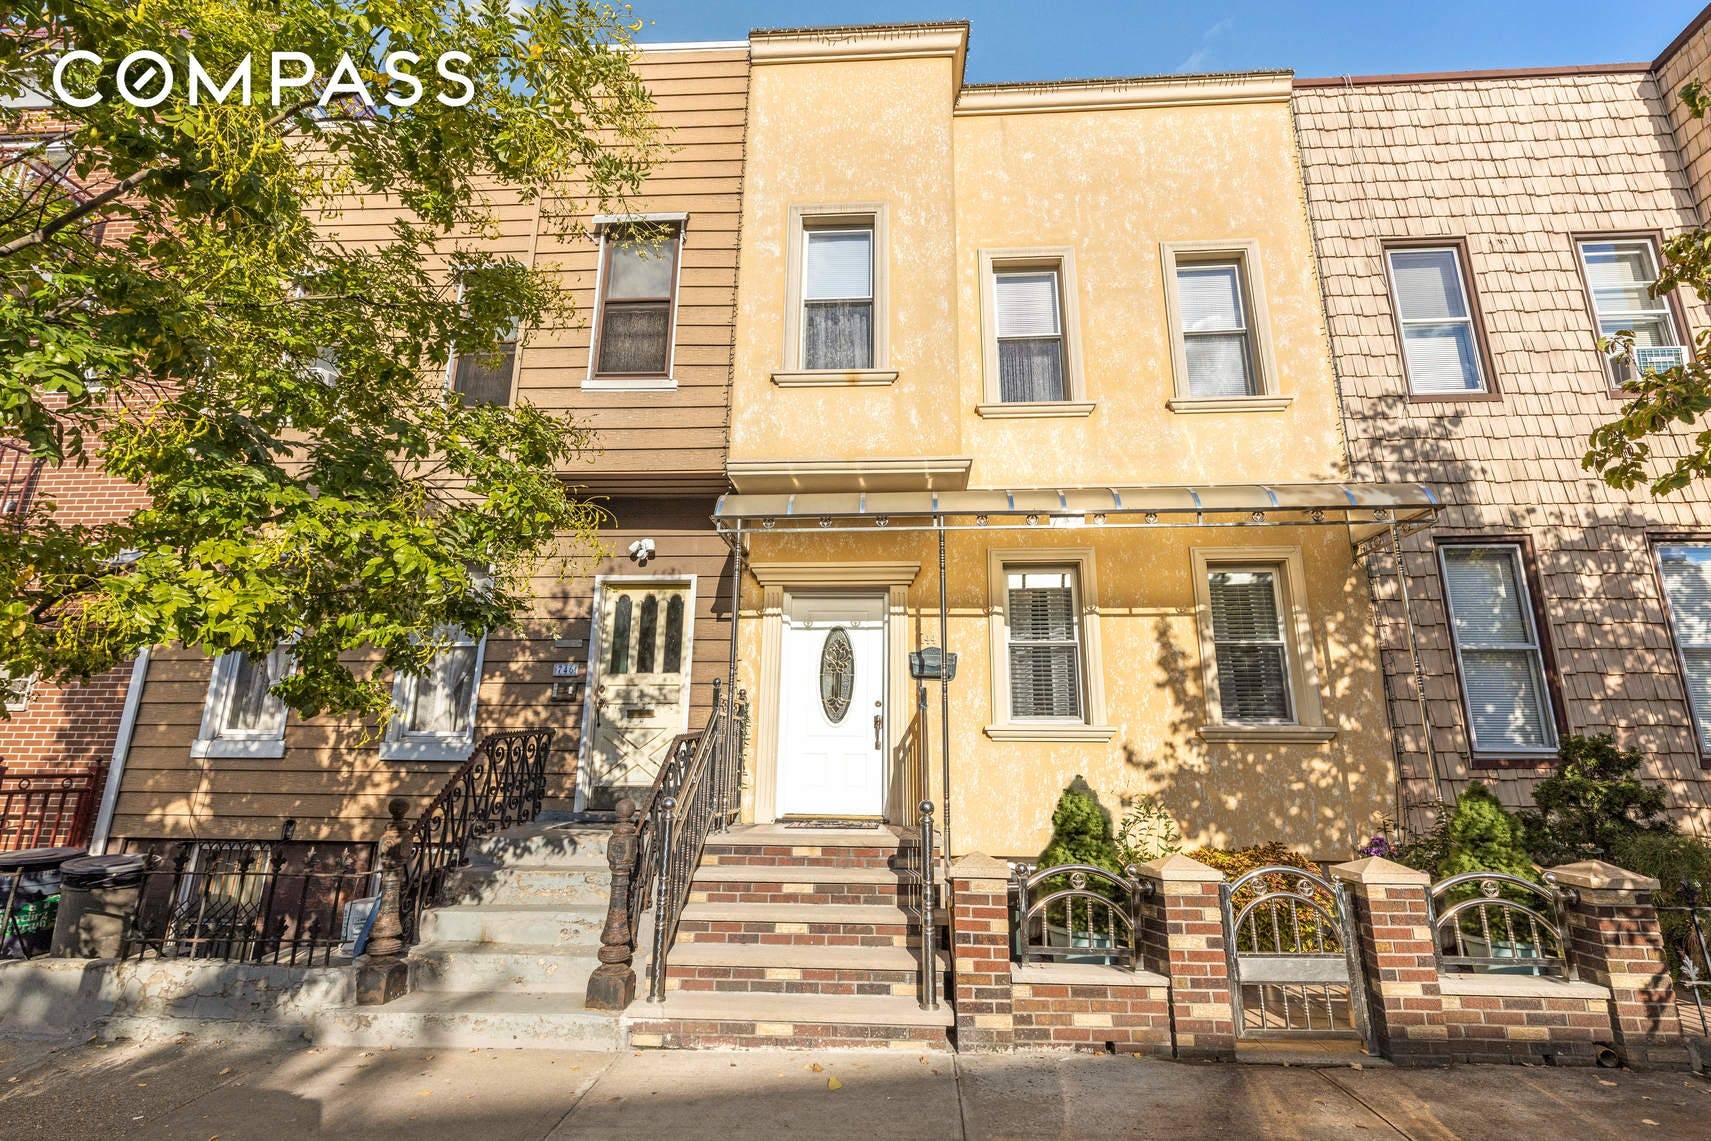 The House You've Been Waiting For This beautiful two family home is located on a quiet and residential tree lined street in Greenpoint.